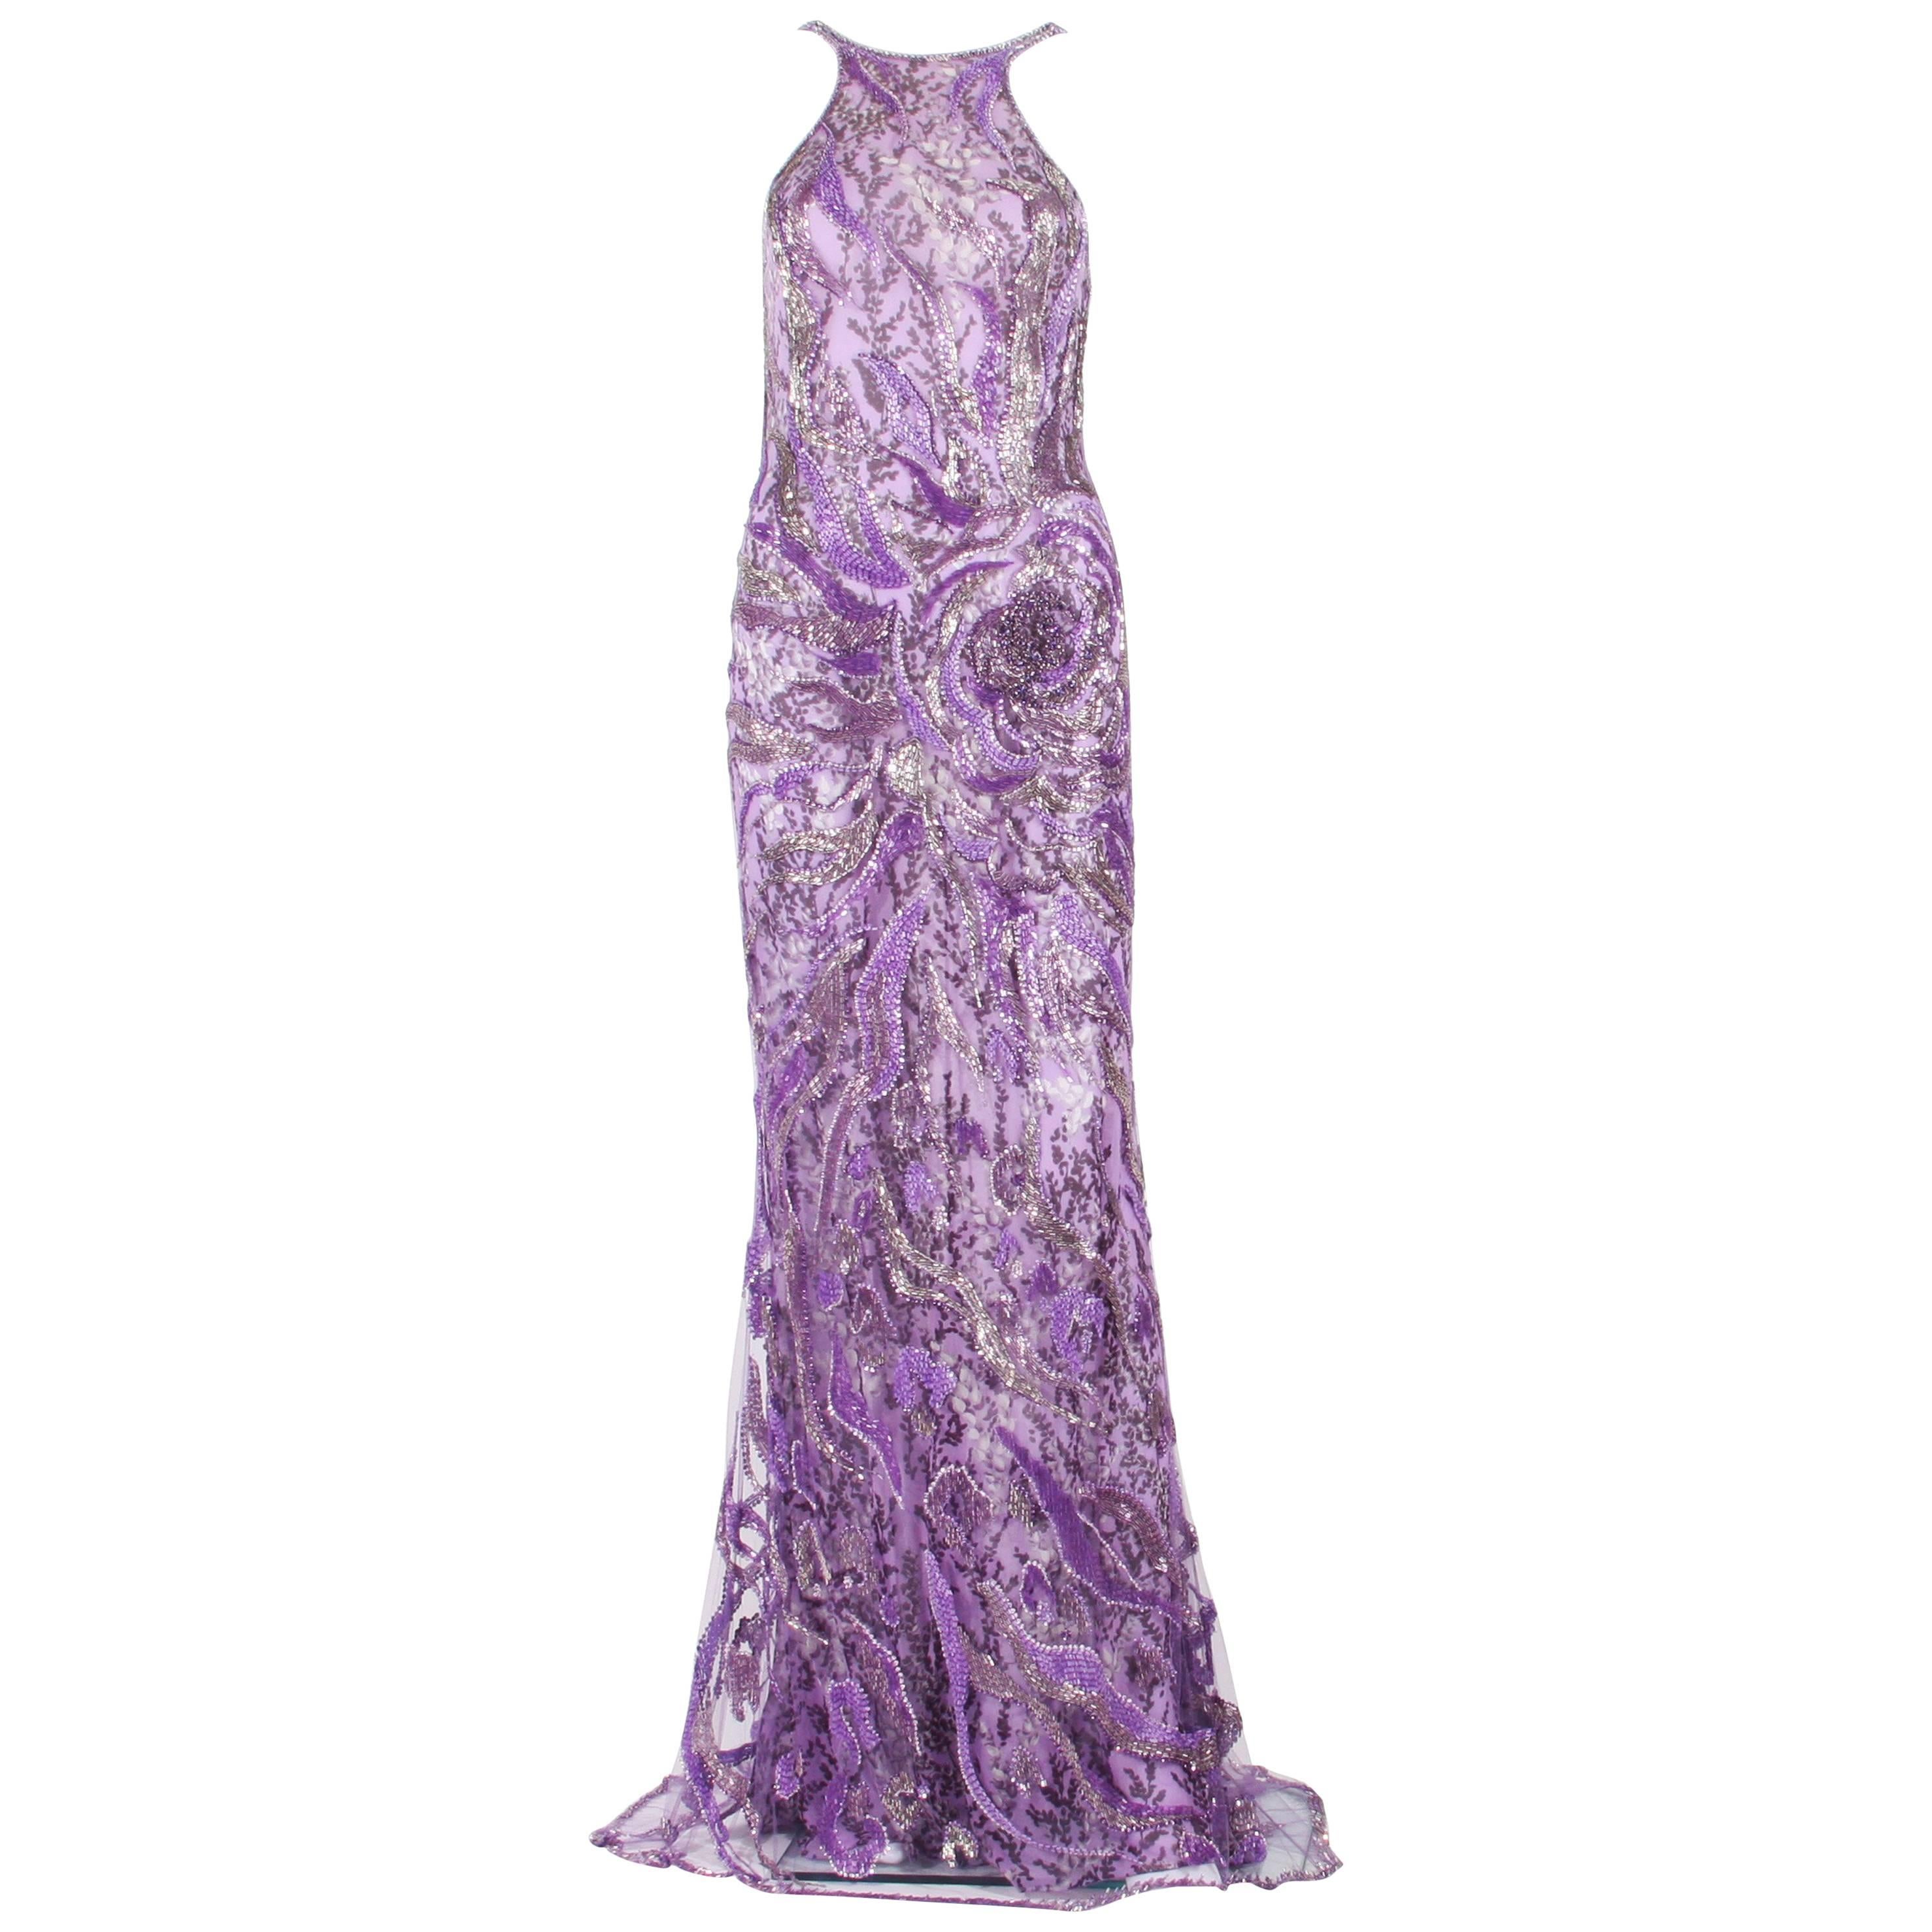 New Atelier Versace Wisteria Purple Silk Fully Beaded Dress Gown  For Sale